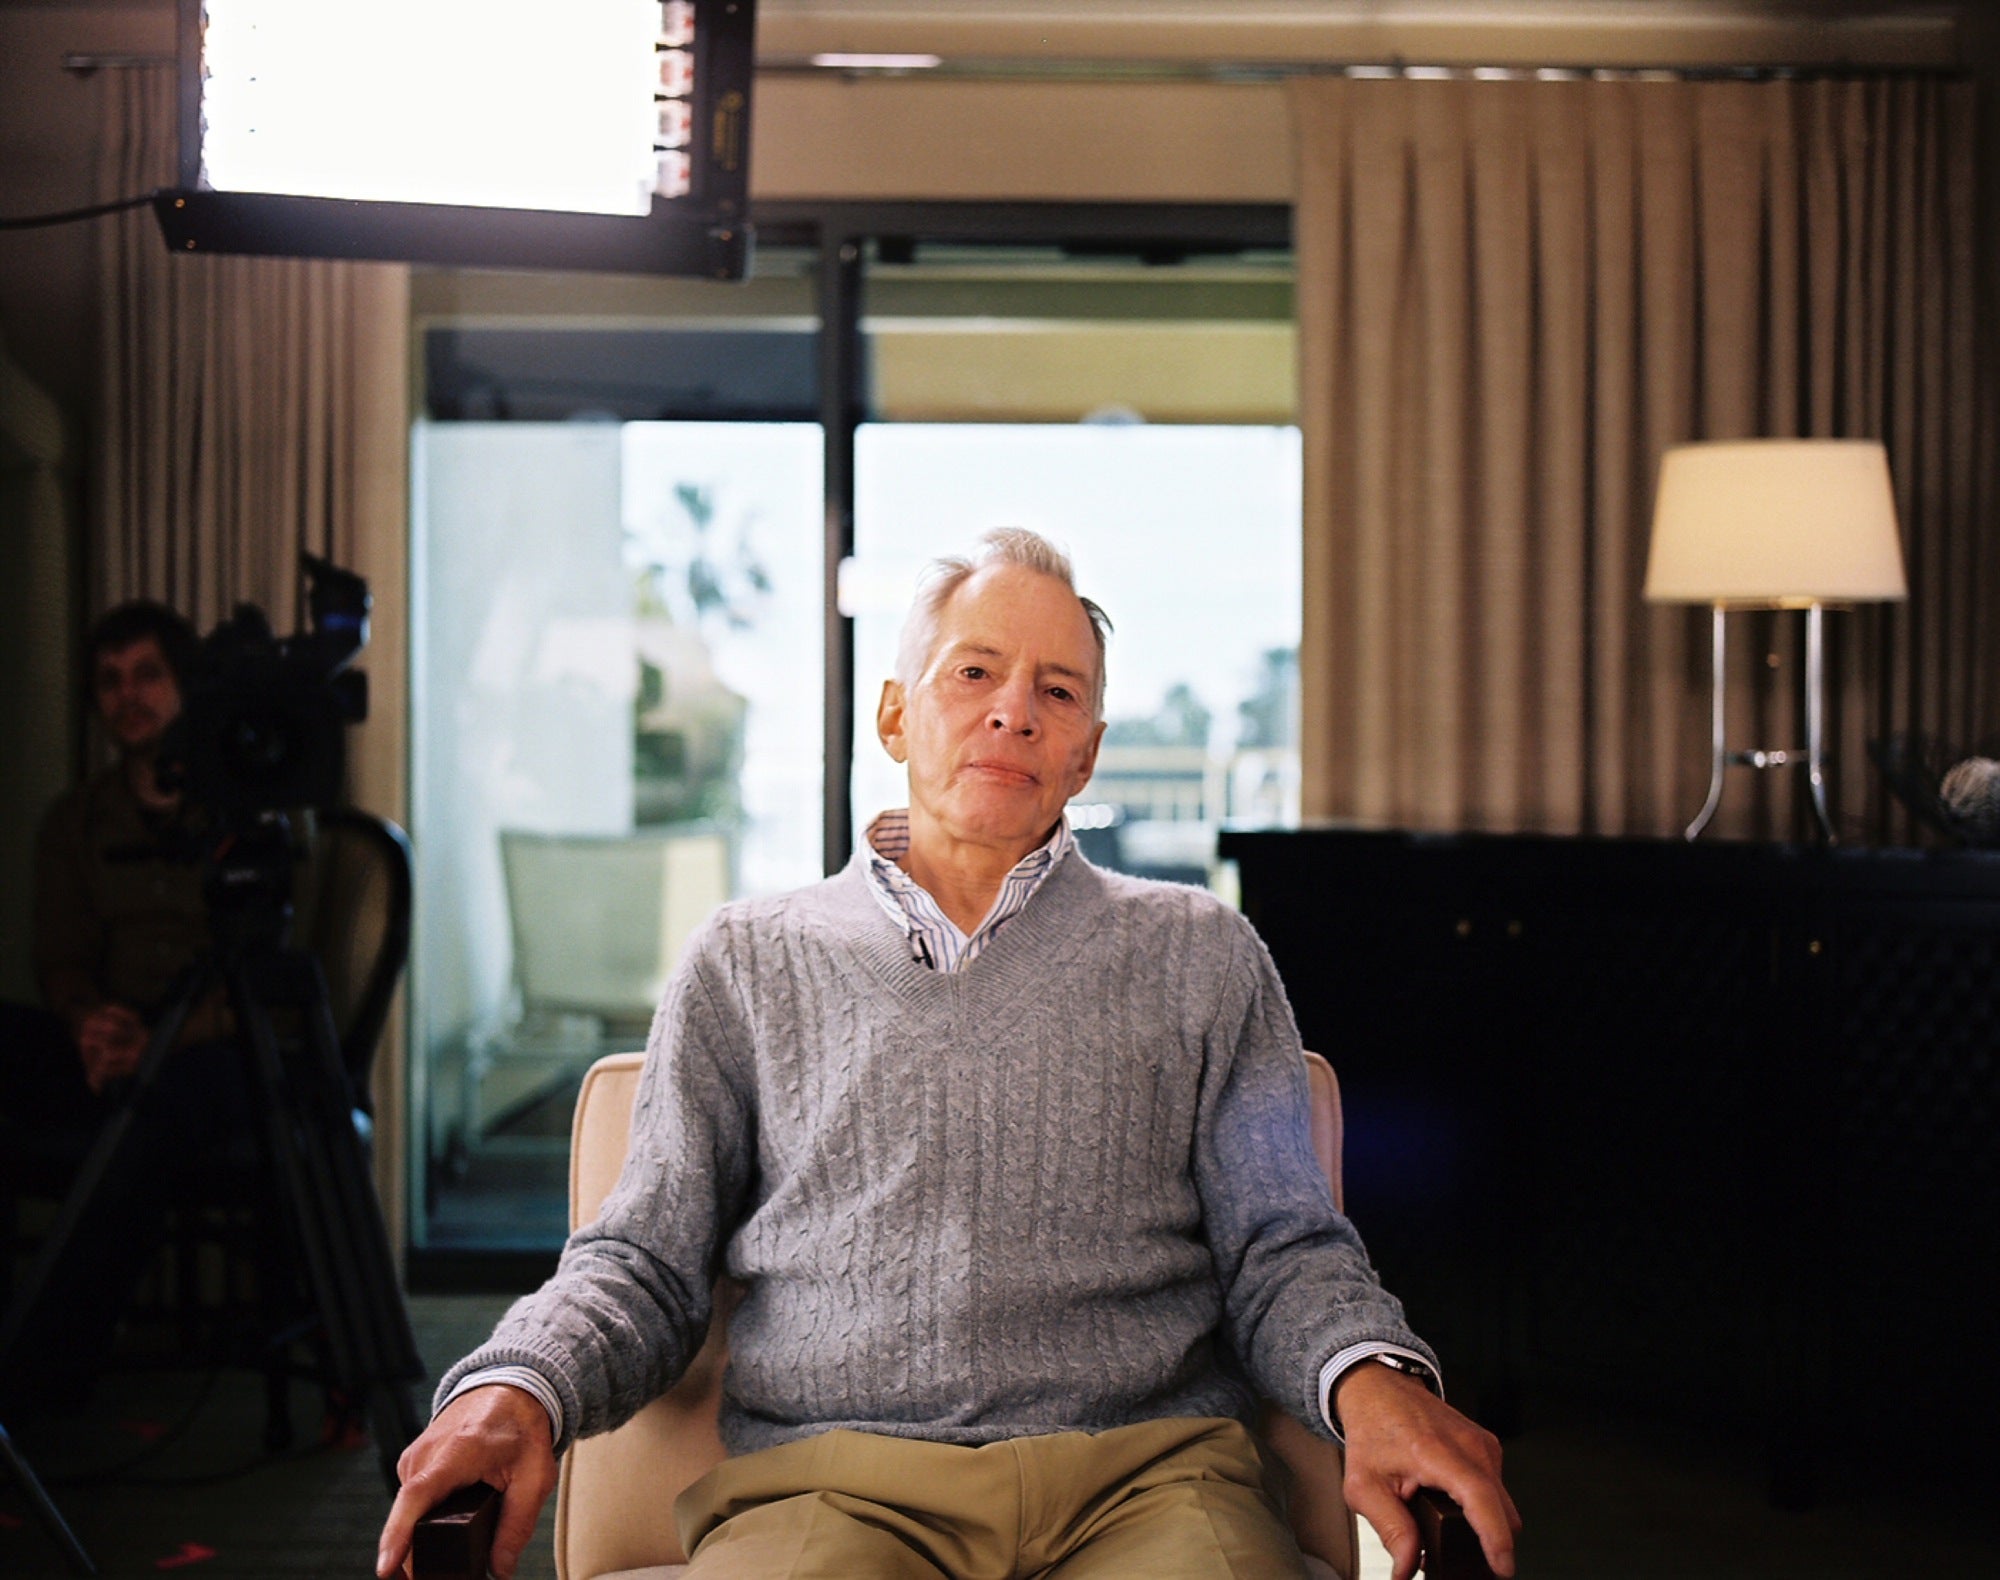 Robert Durst is pictured in a still from the HBO documentary “The Jinx” in which he confessed that he “killed them all"